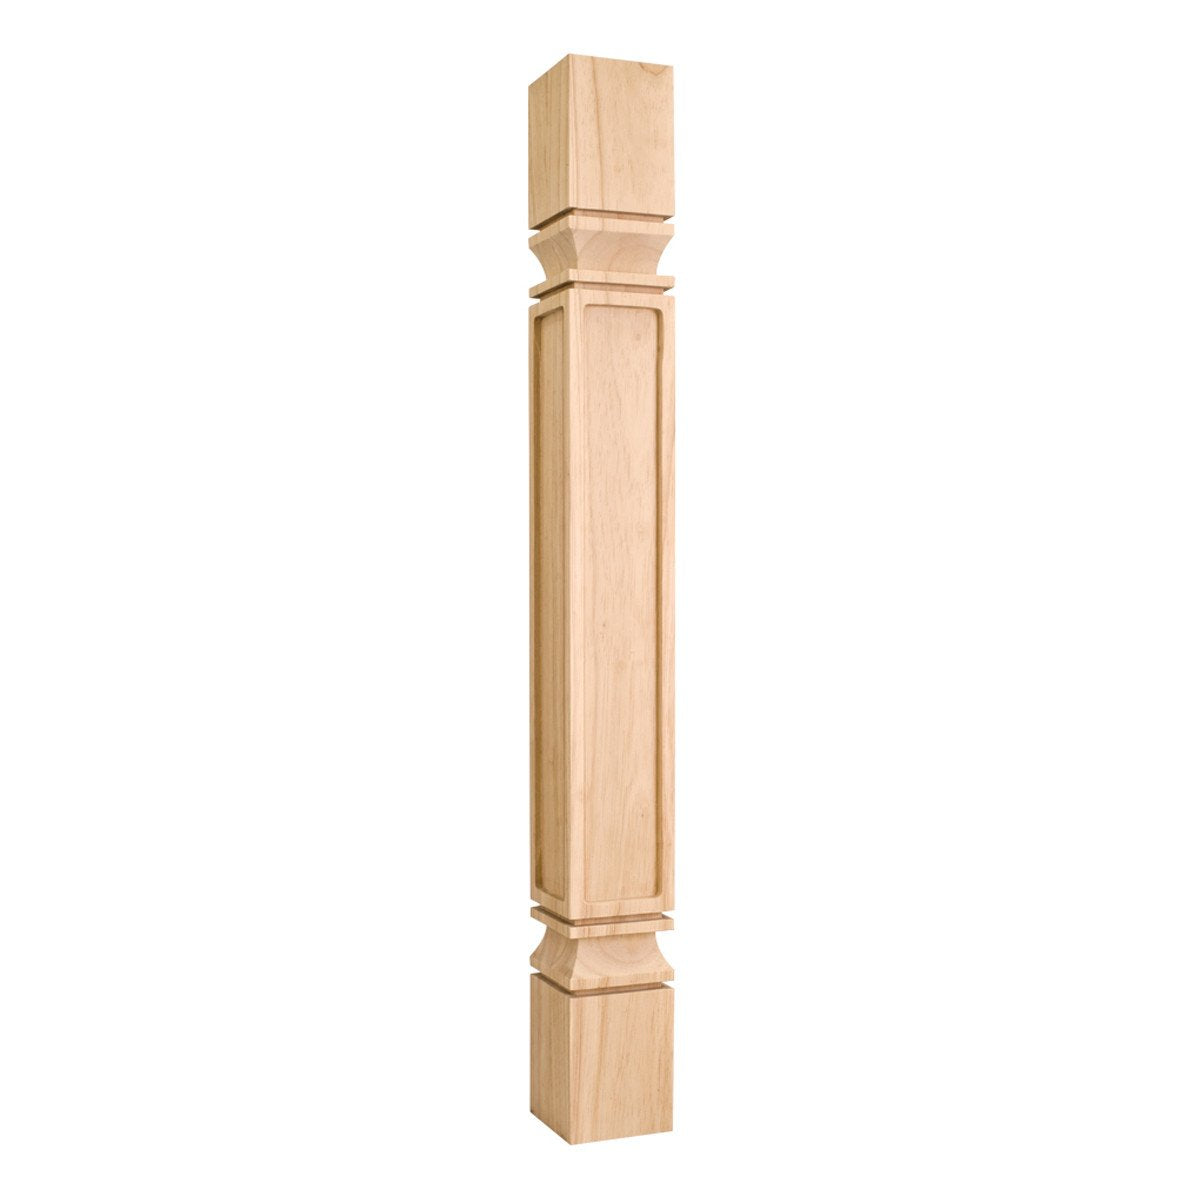 Hardware Resources PS-9MP 3-3/4" W x 3-3/4" D x 35-1/2" H Maple Square Mission Post